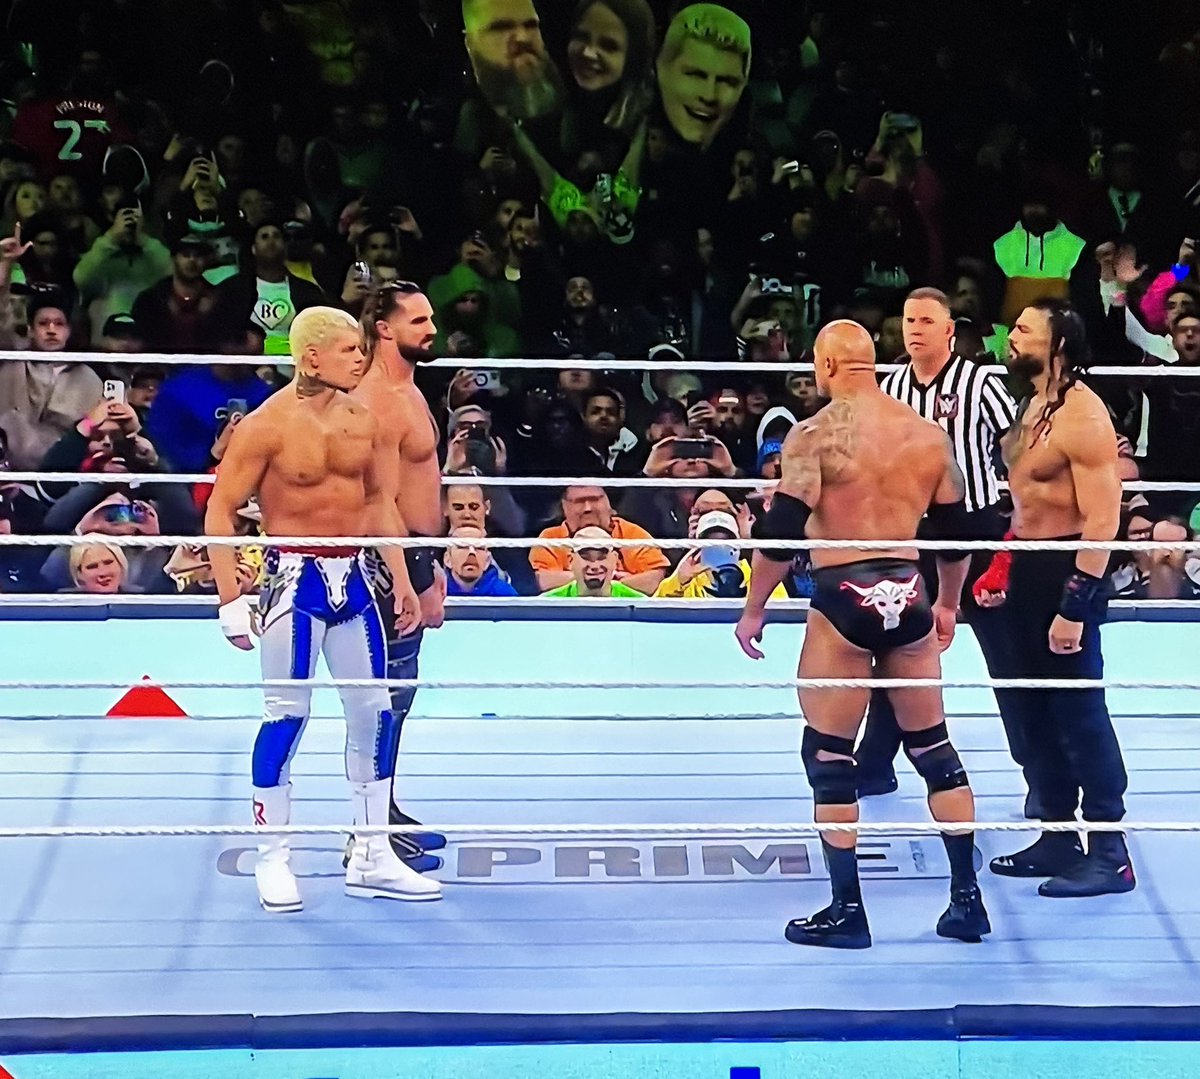 The main event for night one of #WrestleMania  featuring @TheRock and @WWERomanReigns versus @WWERollins and @CodyRhodes was top notch storytelling and hard hitting action!!